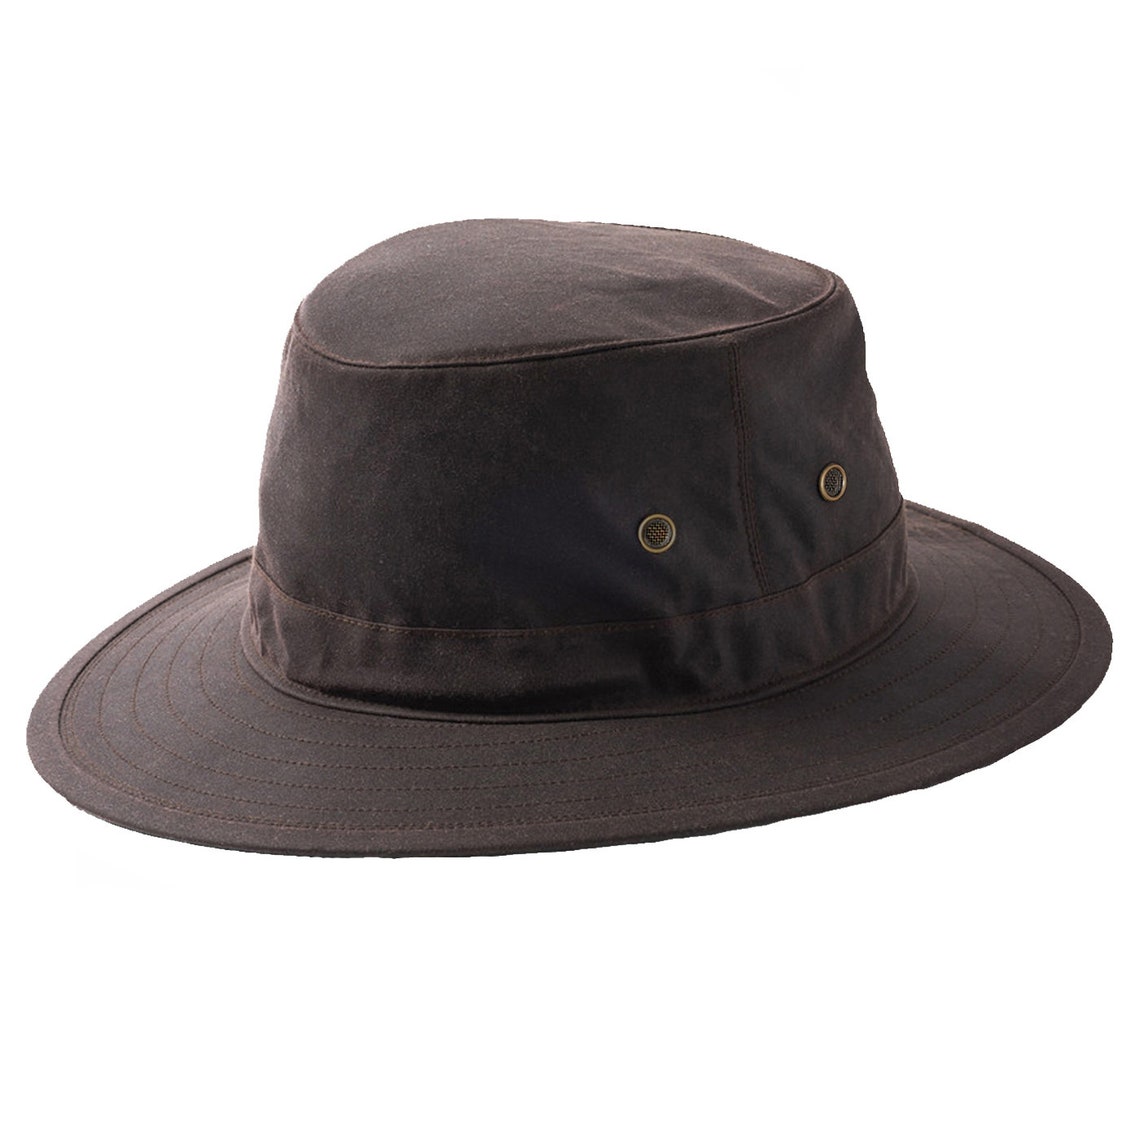 Wax Bush Hat Fedora British Made Waxed Cotton Water Repellent - Etsy